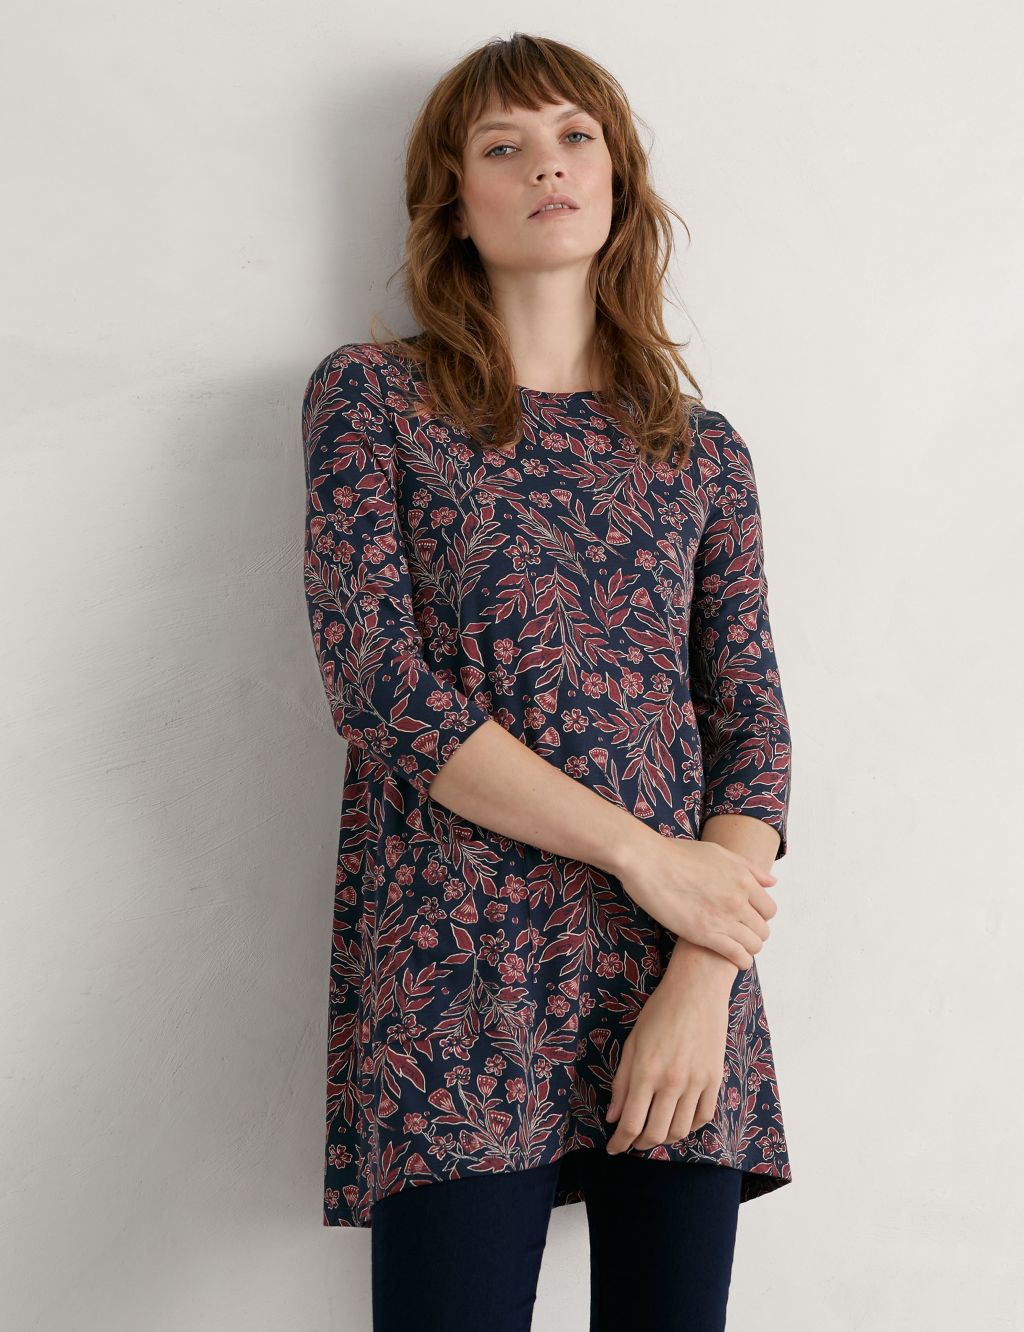 Floral Tunic with Cotton image 1